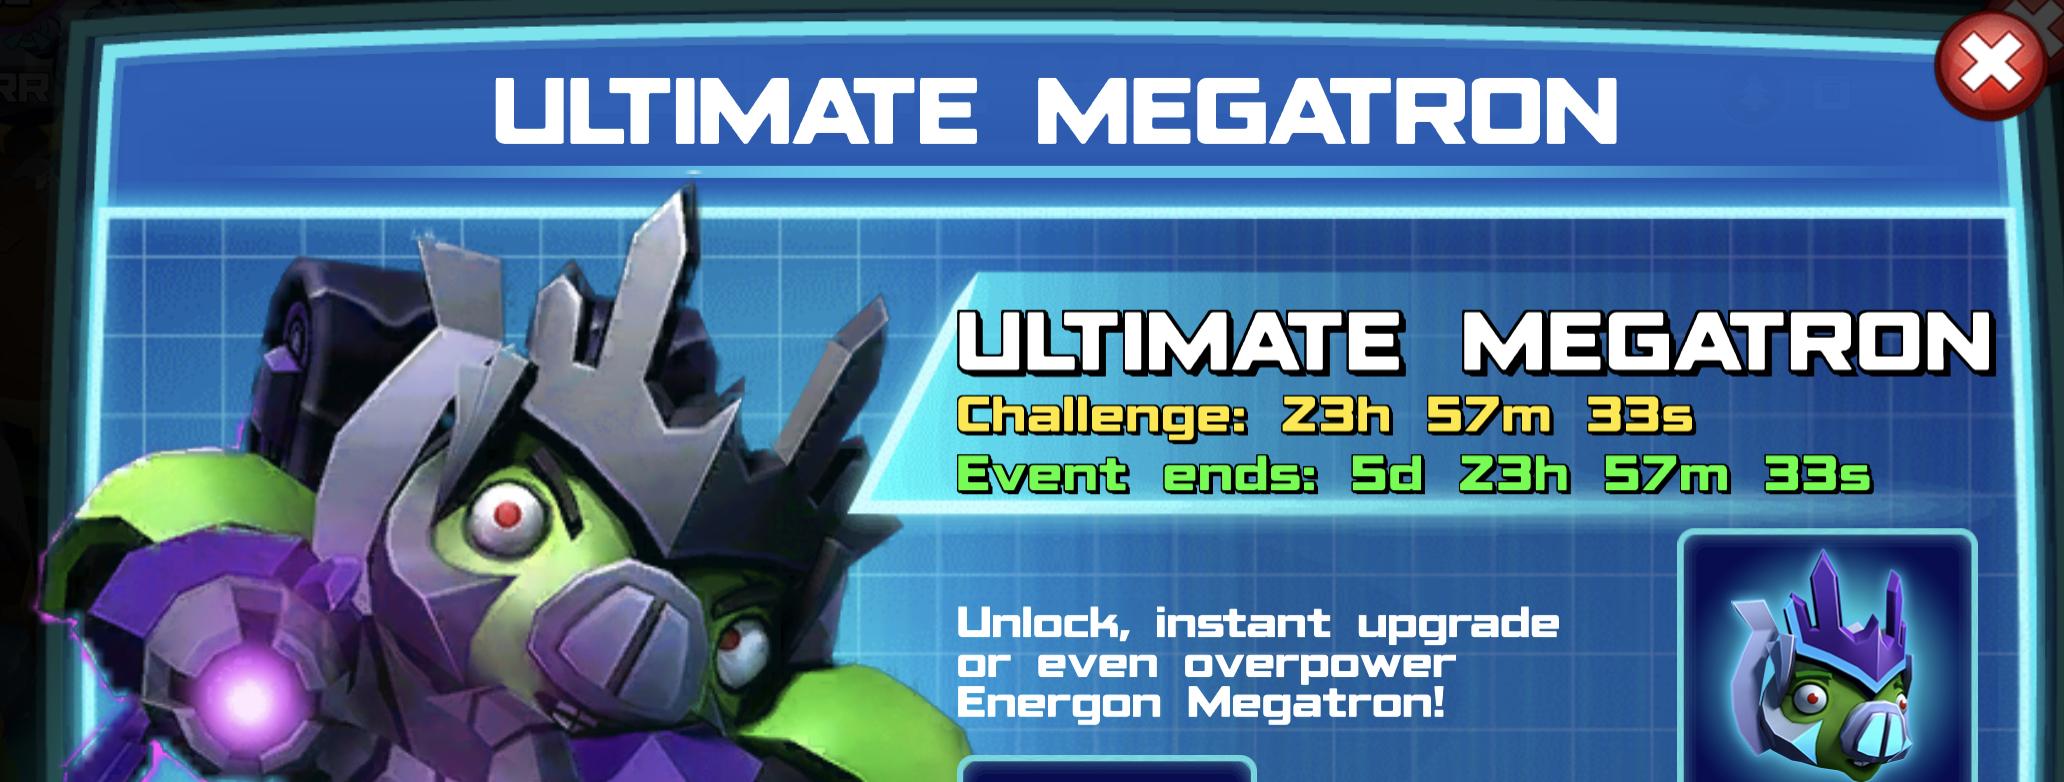 The event banner for Ultimate Megatron